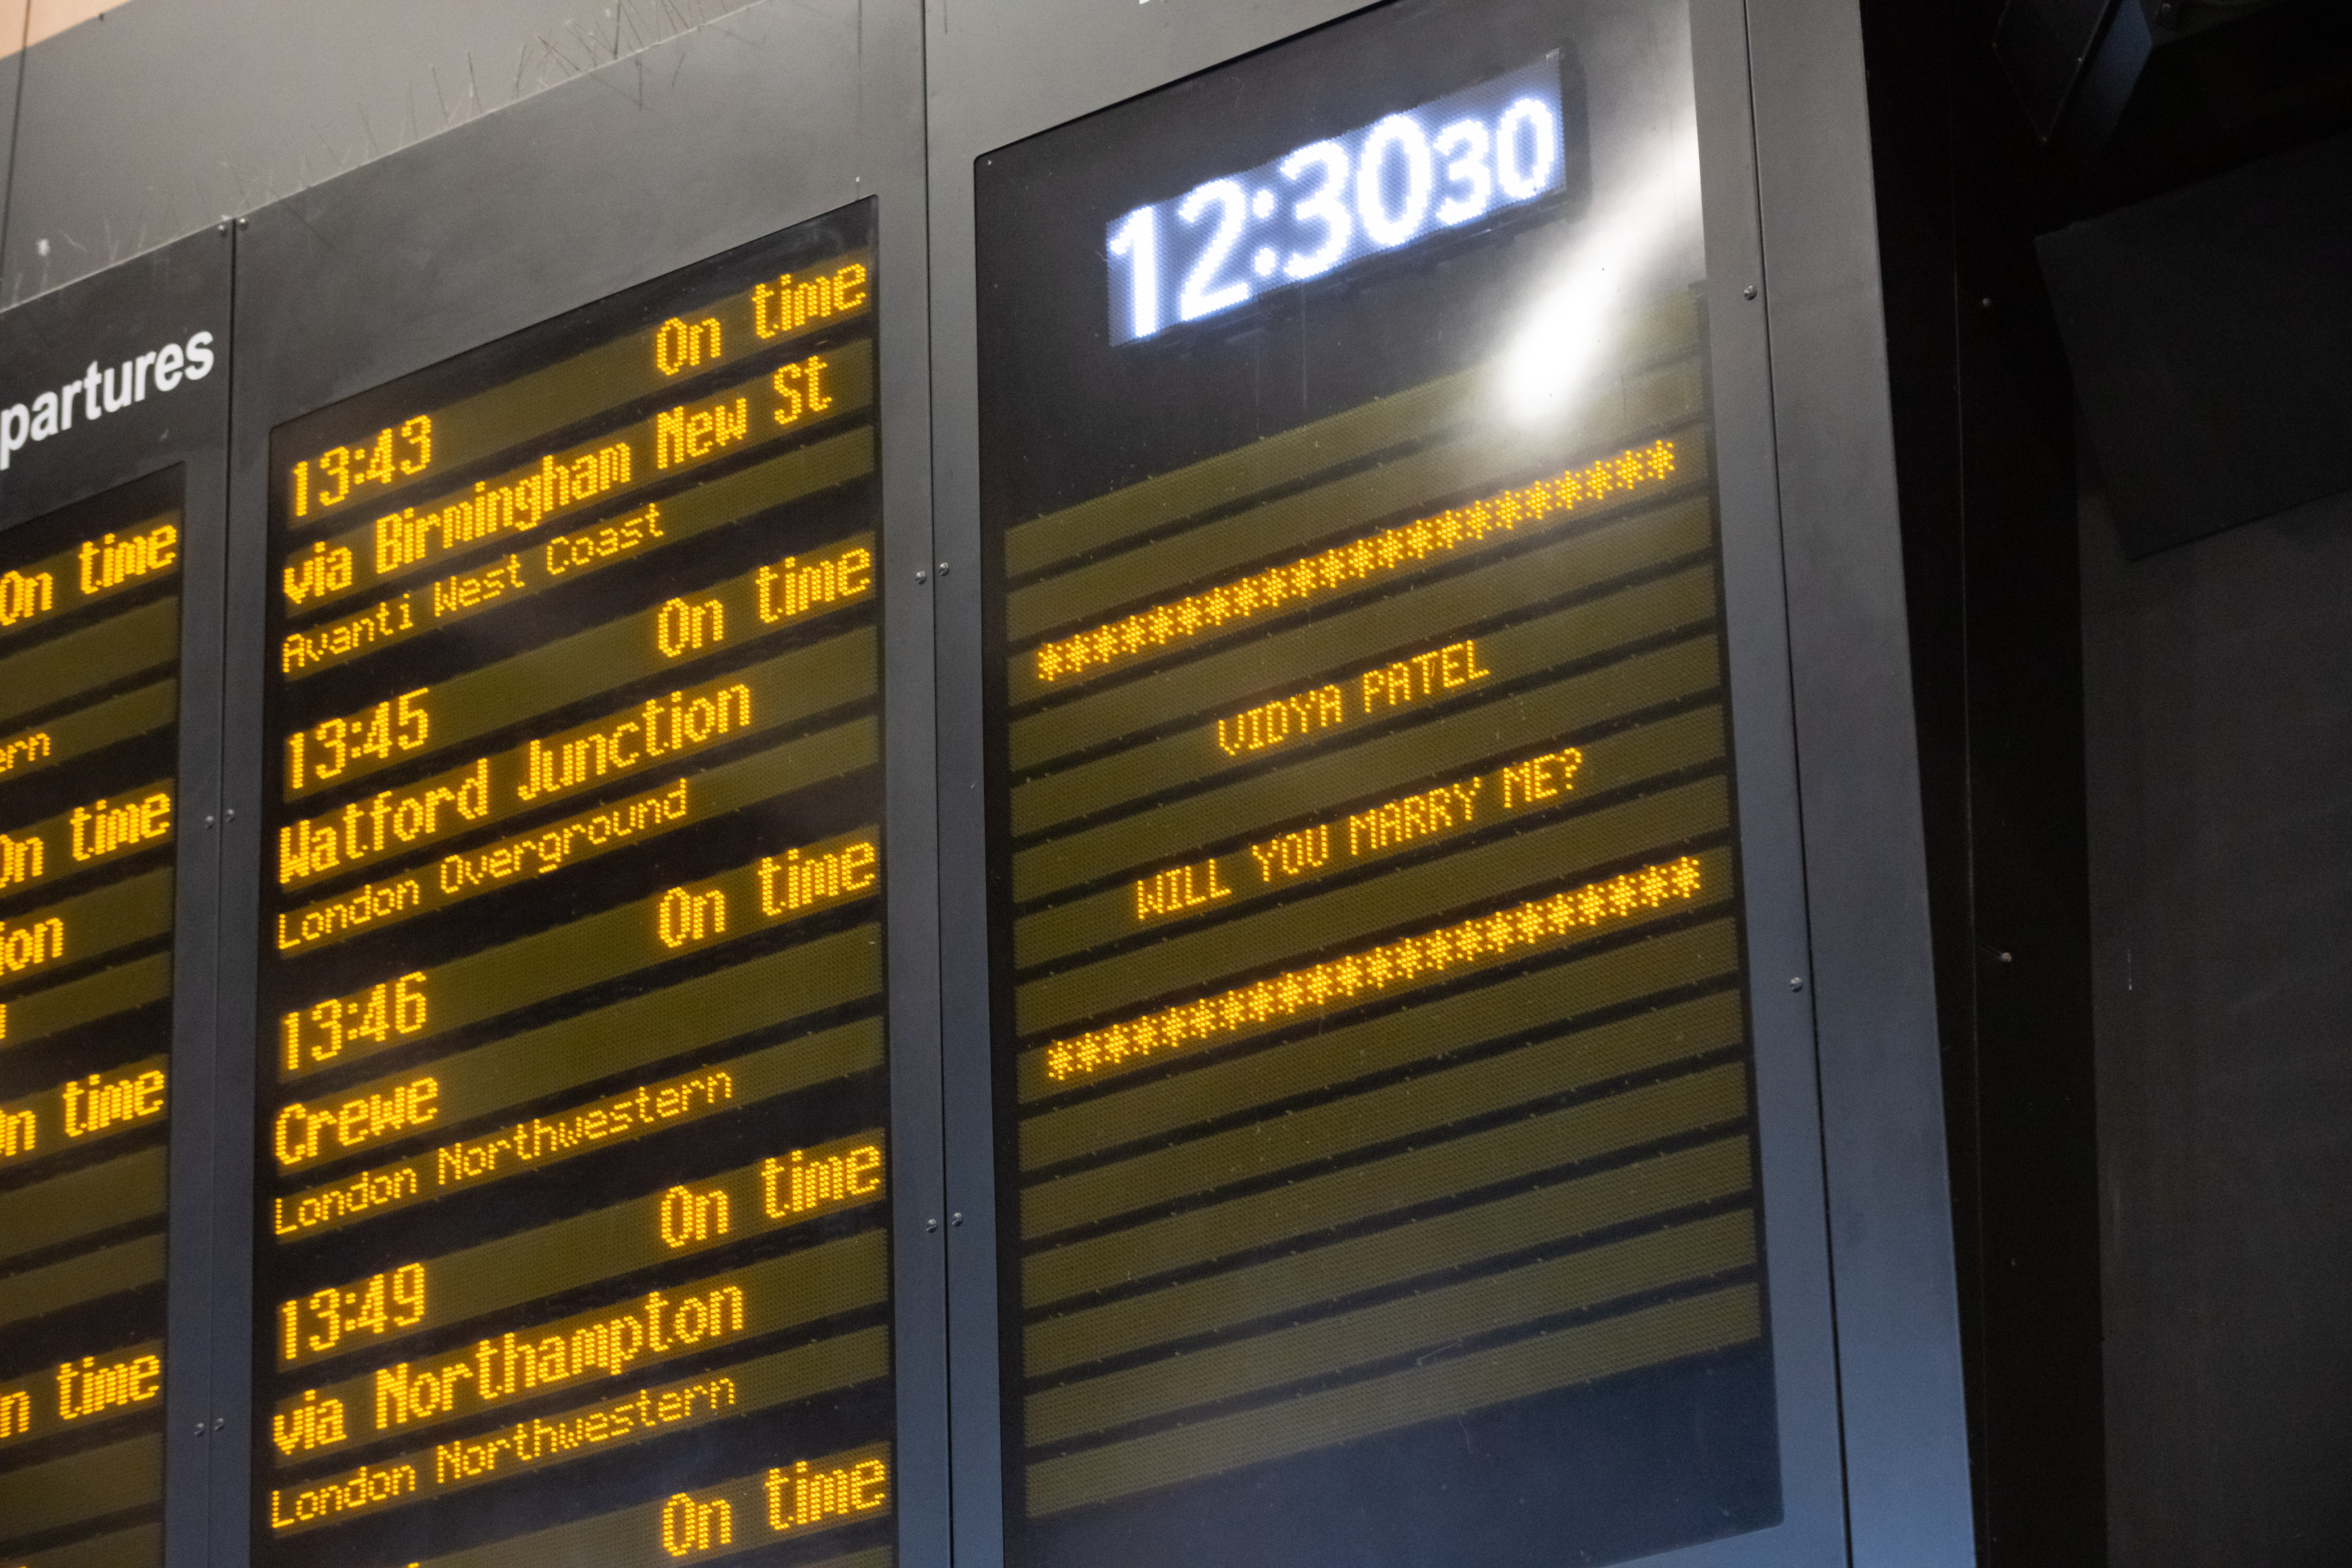 A proposal on the departure boards at Euston Station